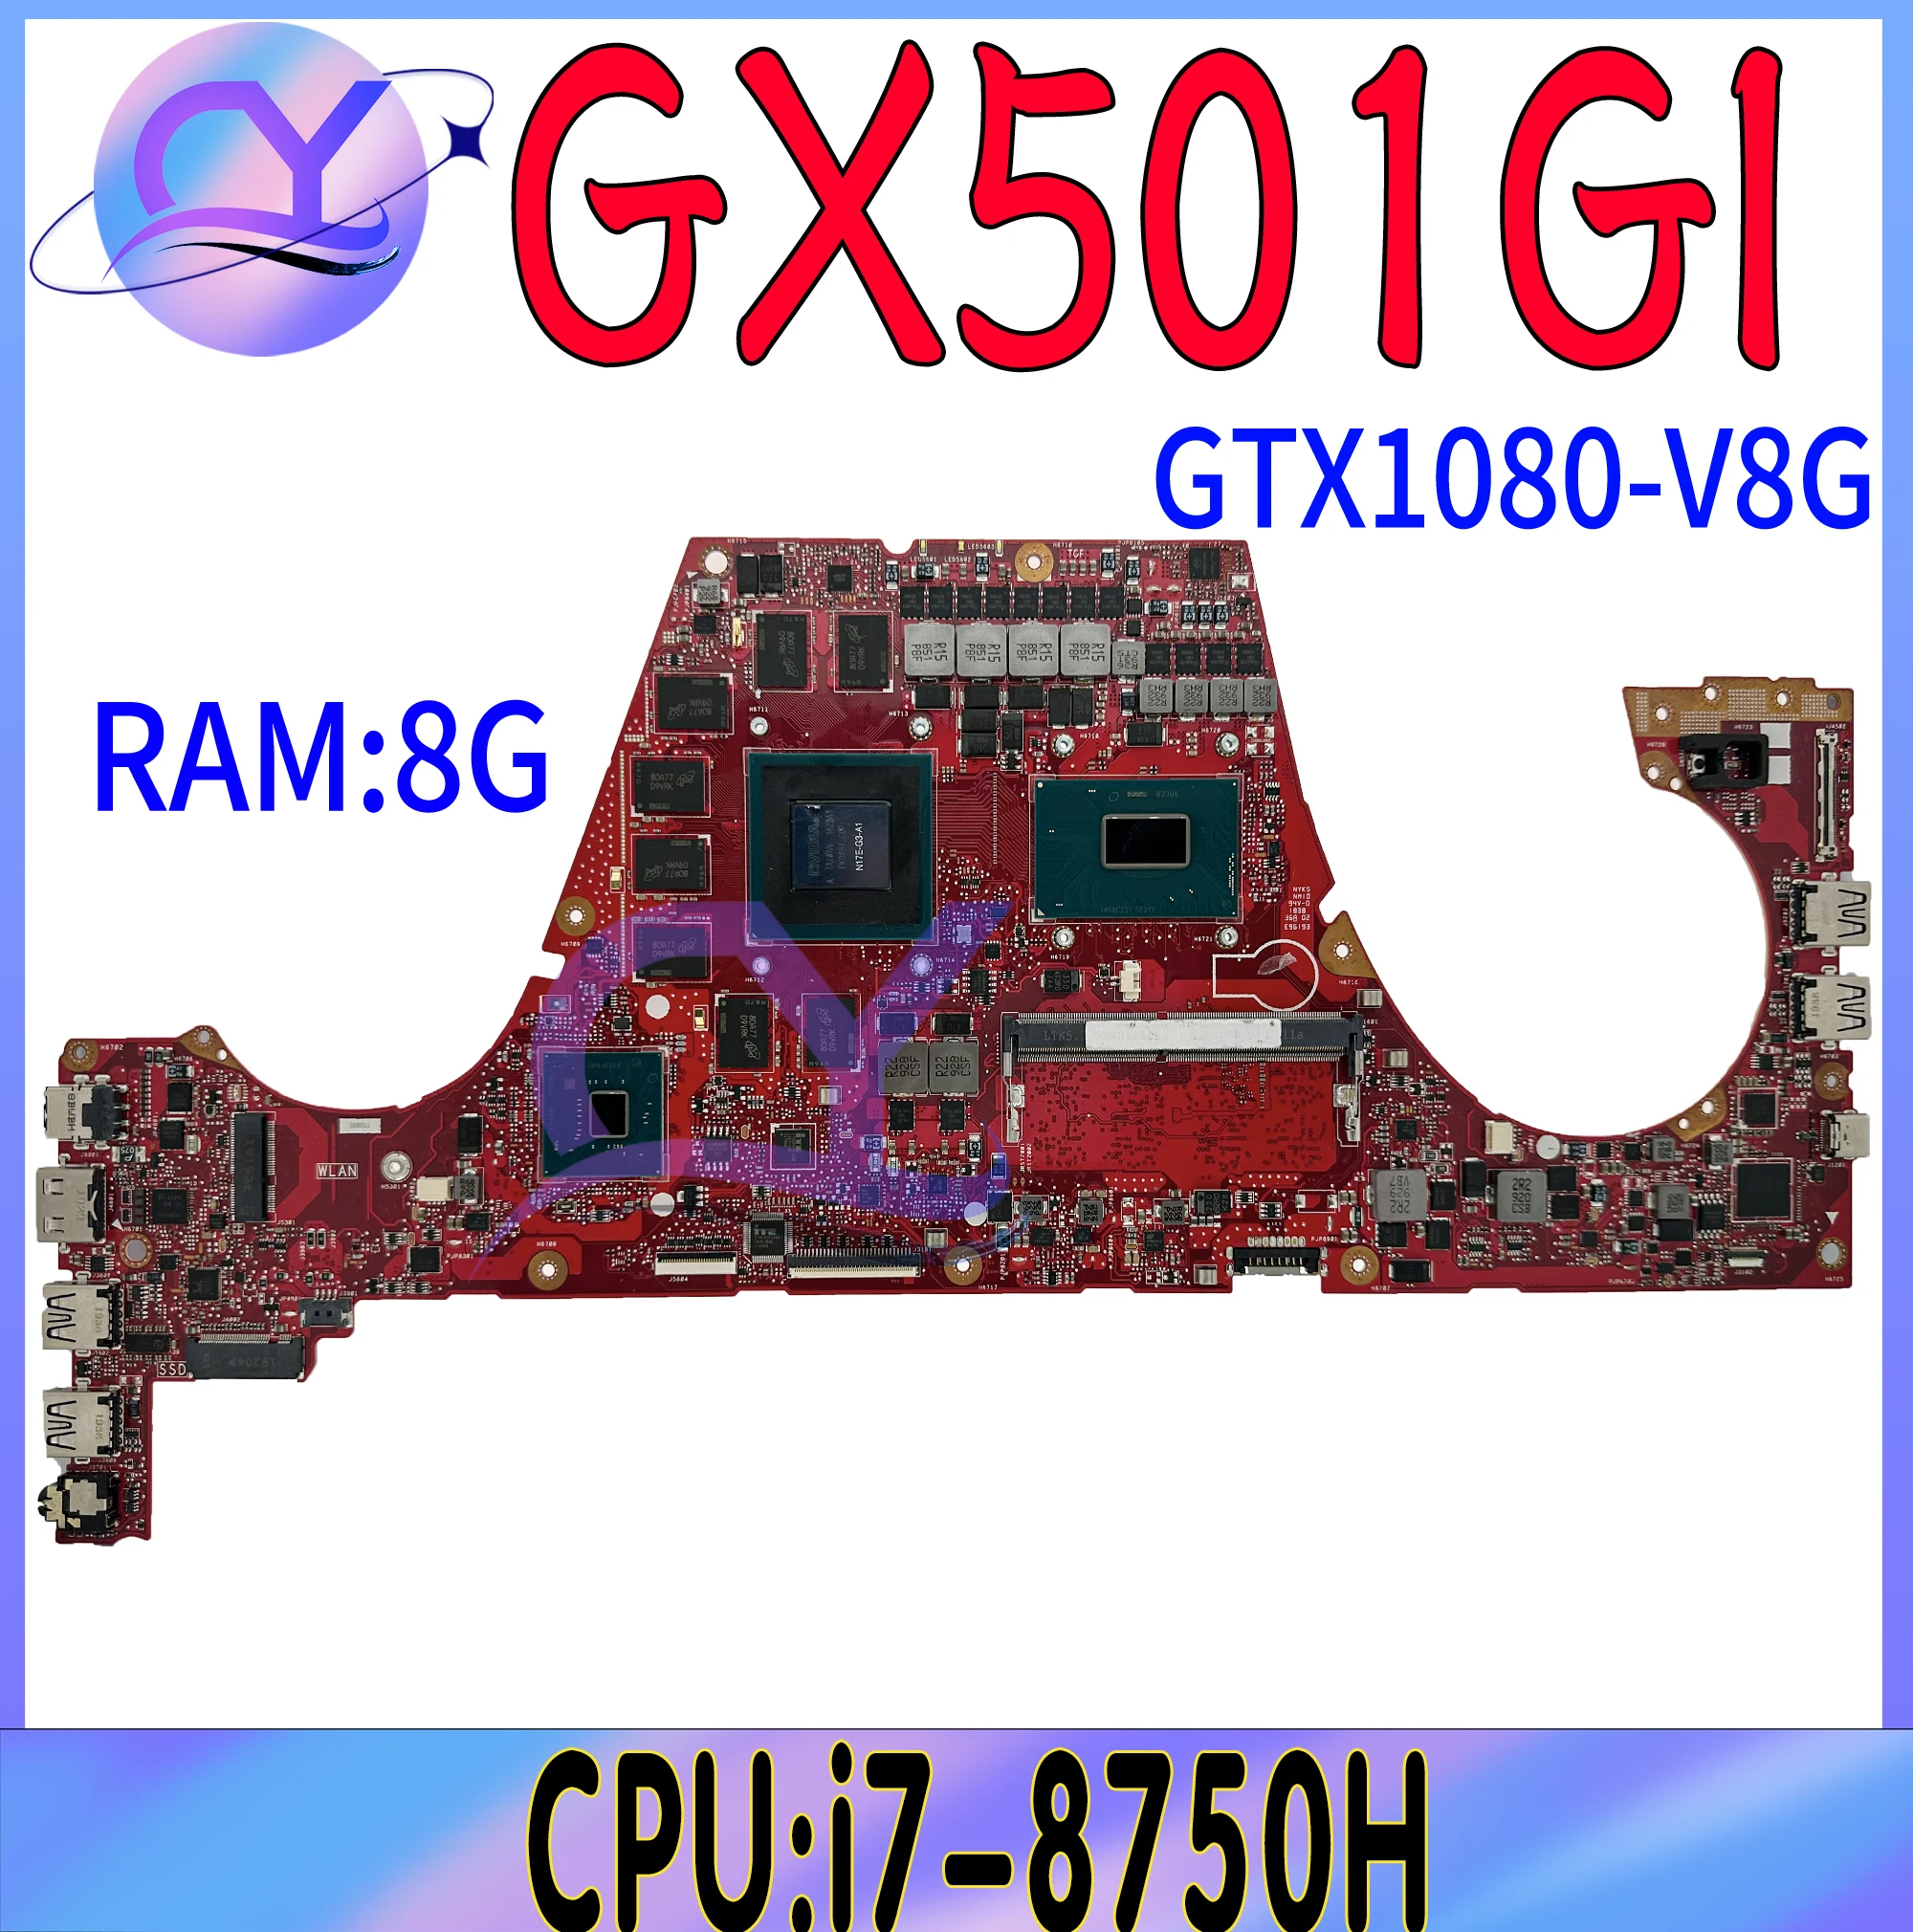 

GX501GI Mainboard For Asus ROG Zephyrus GX501 GX501GI-XS74 Laptop Motherboard With i7-8750H GTX1080-V8G 8GB-RAM 100% Test Well